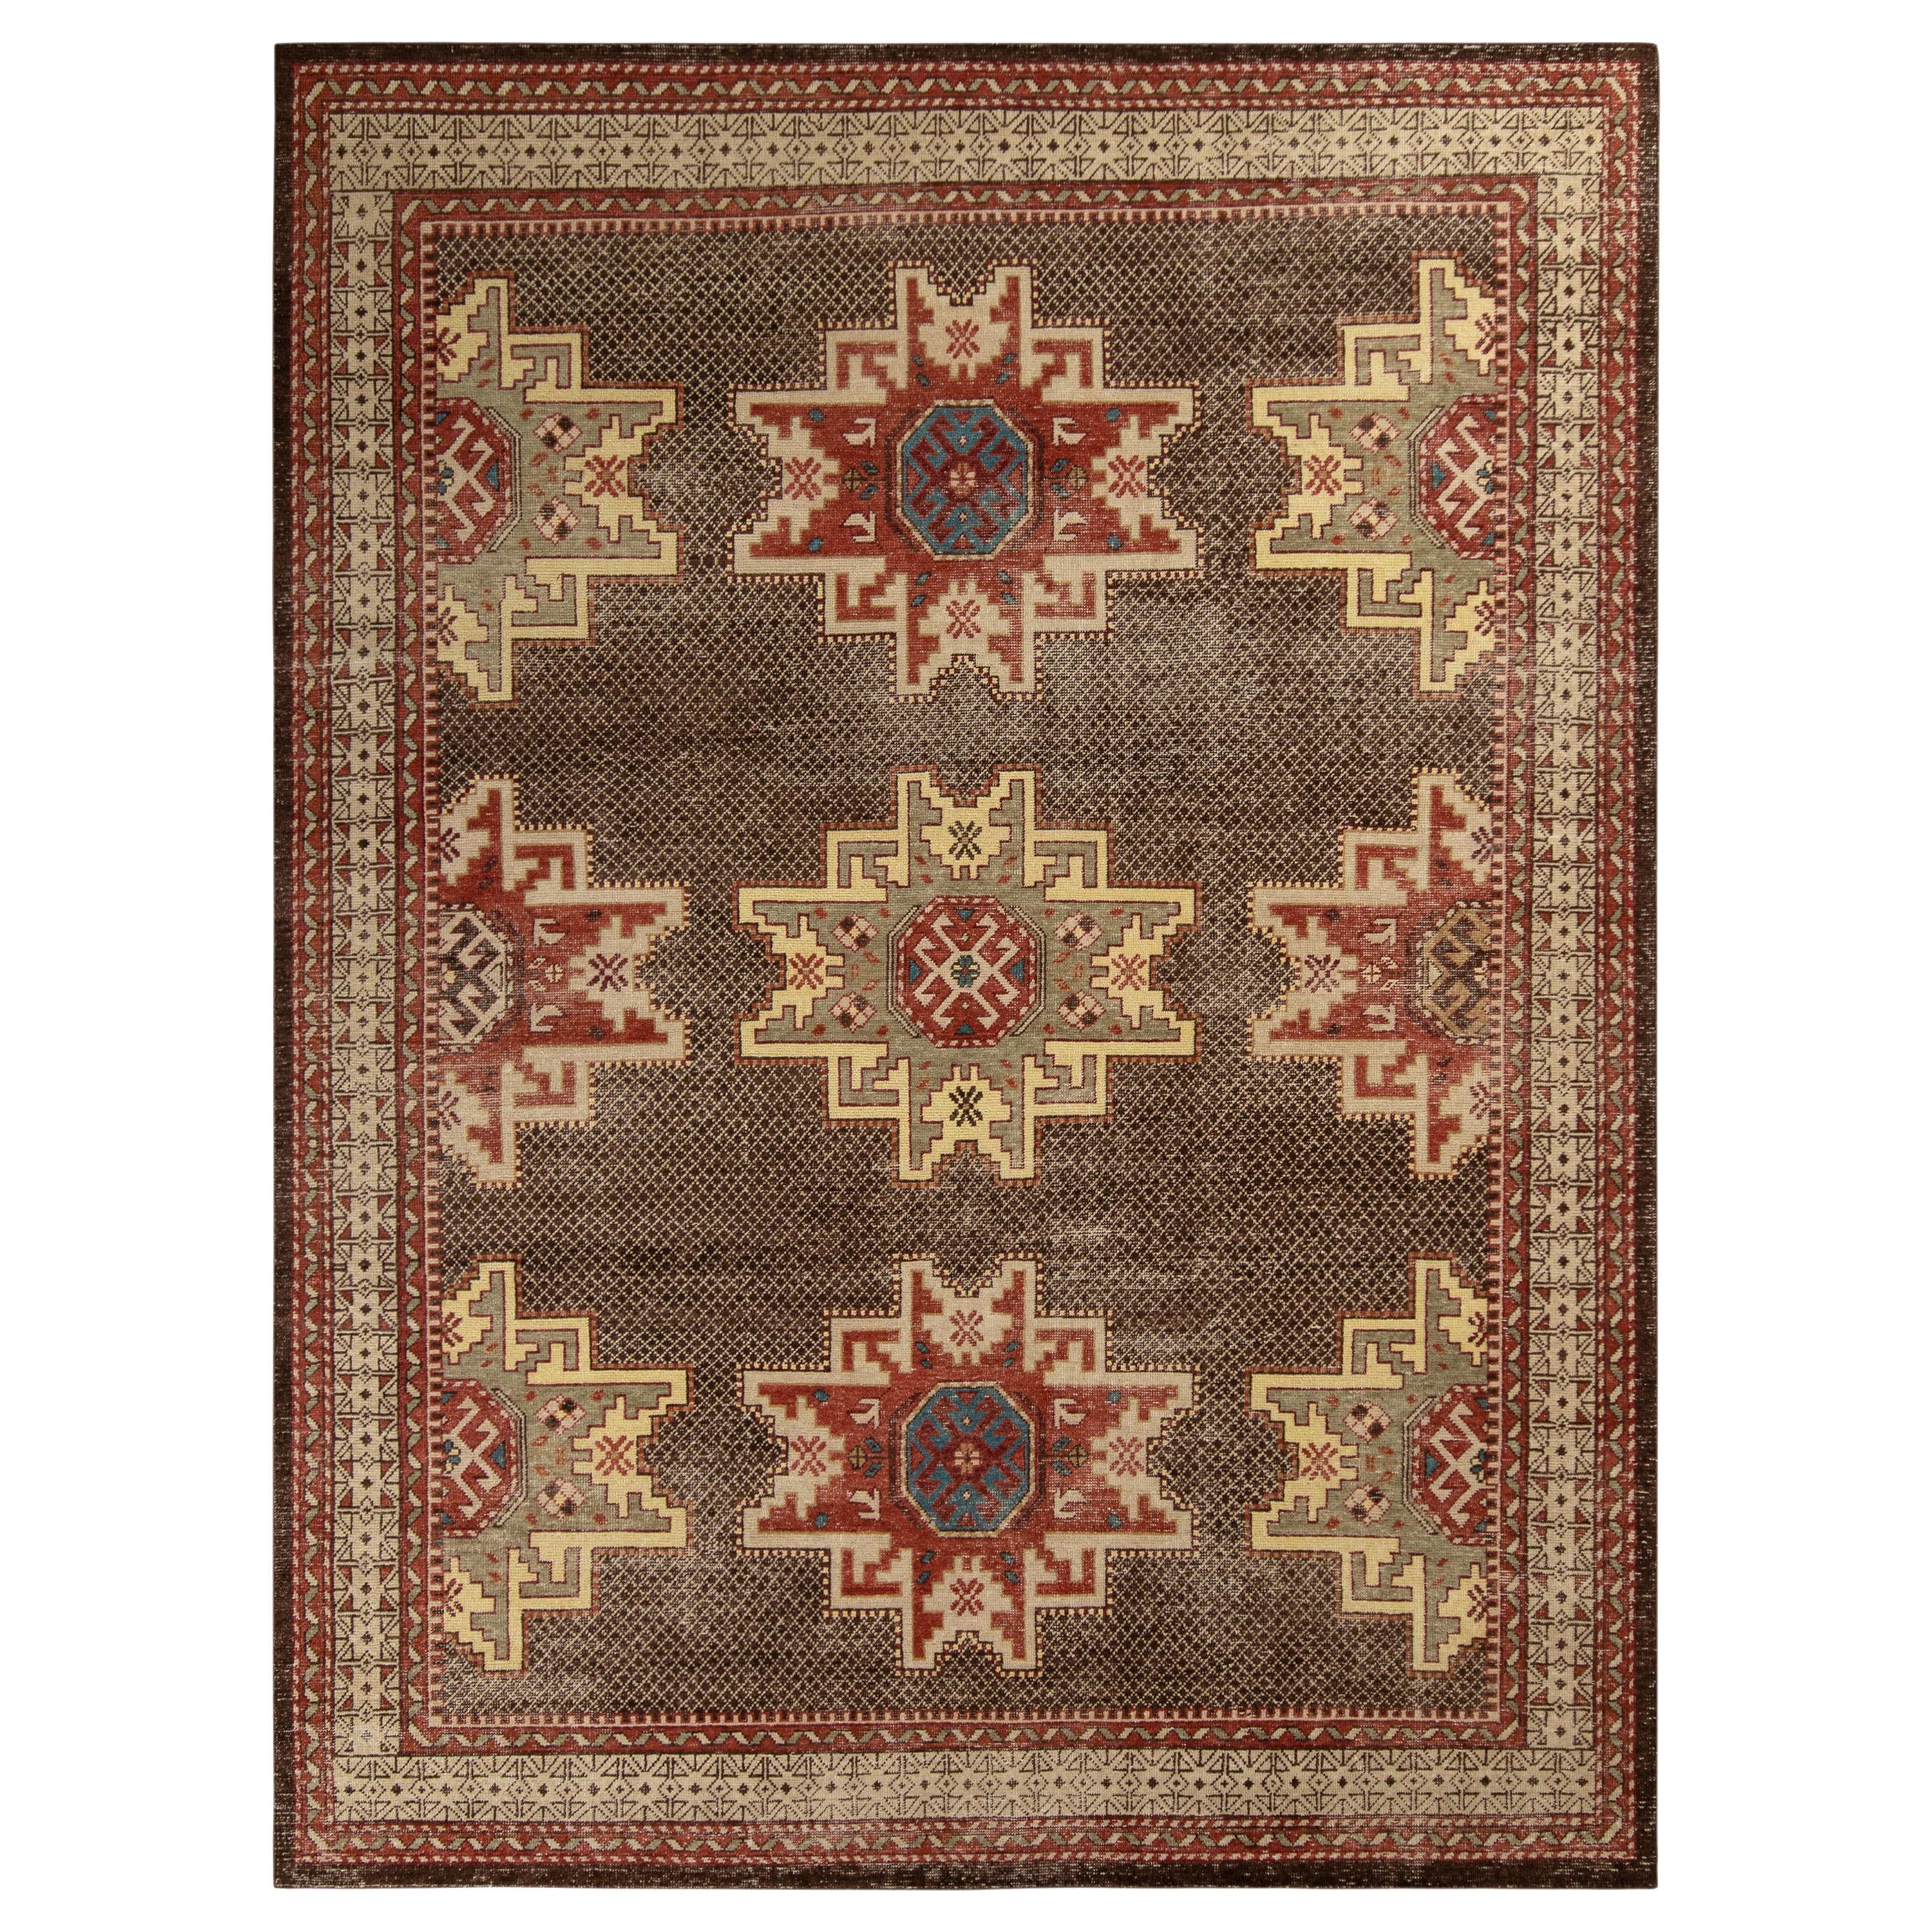 Rug & Kilim’s Distressed Kuba Style Rug in Beige-Brown and Red Geometric Pattern For Sale